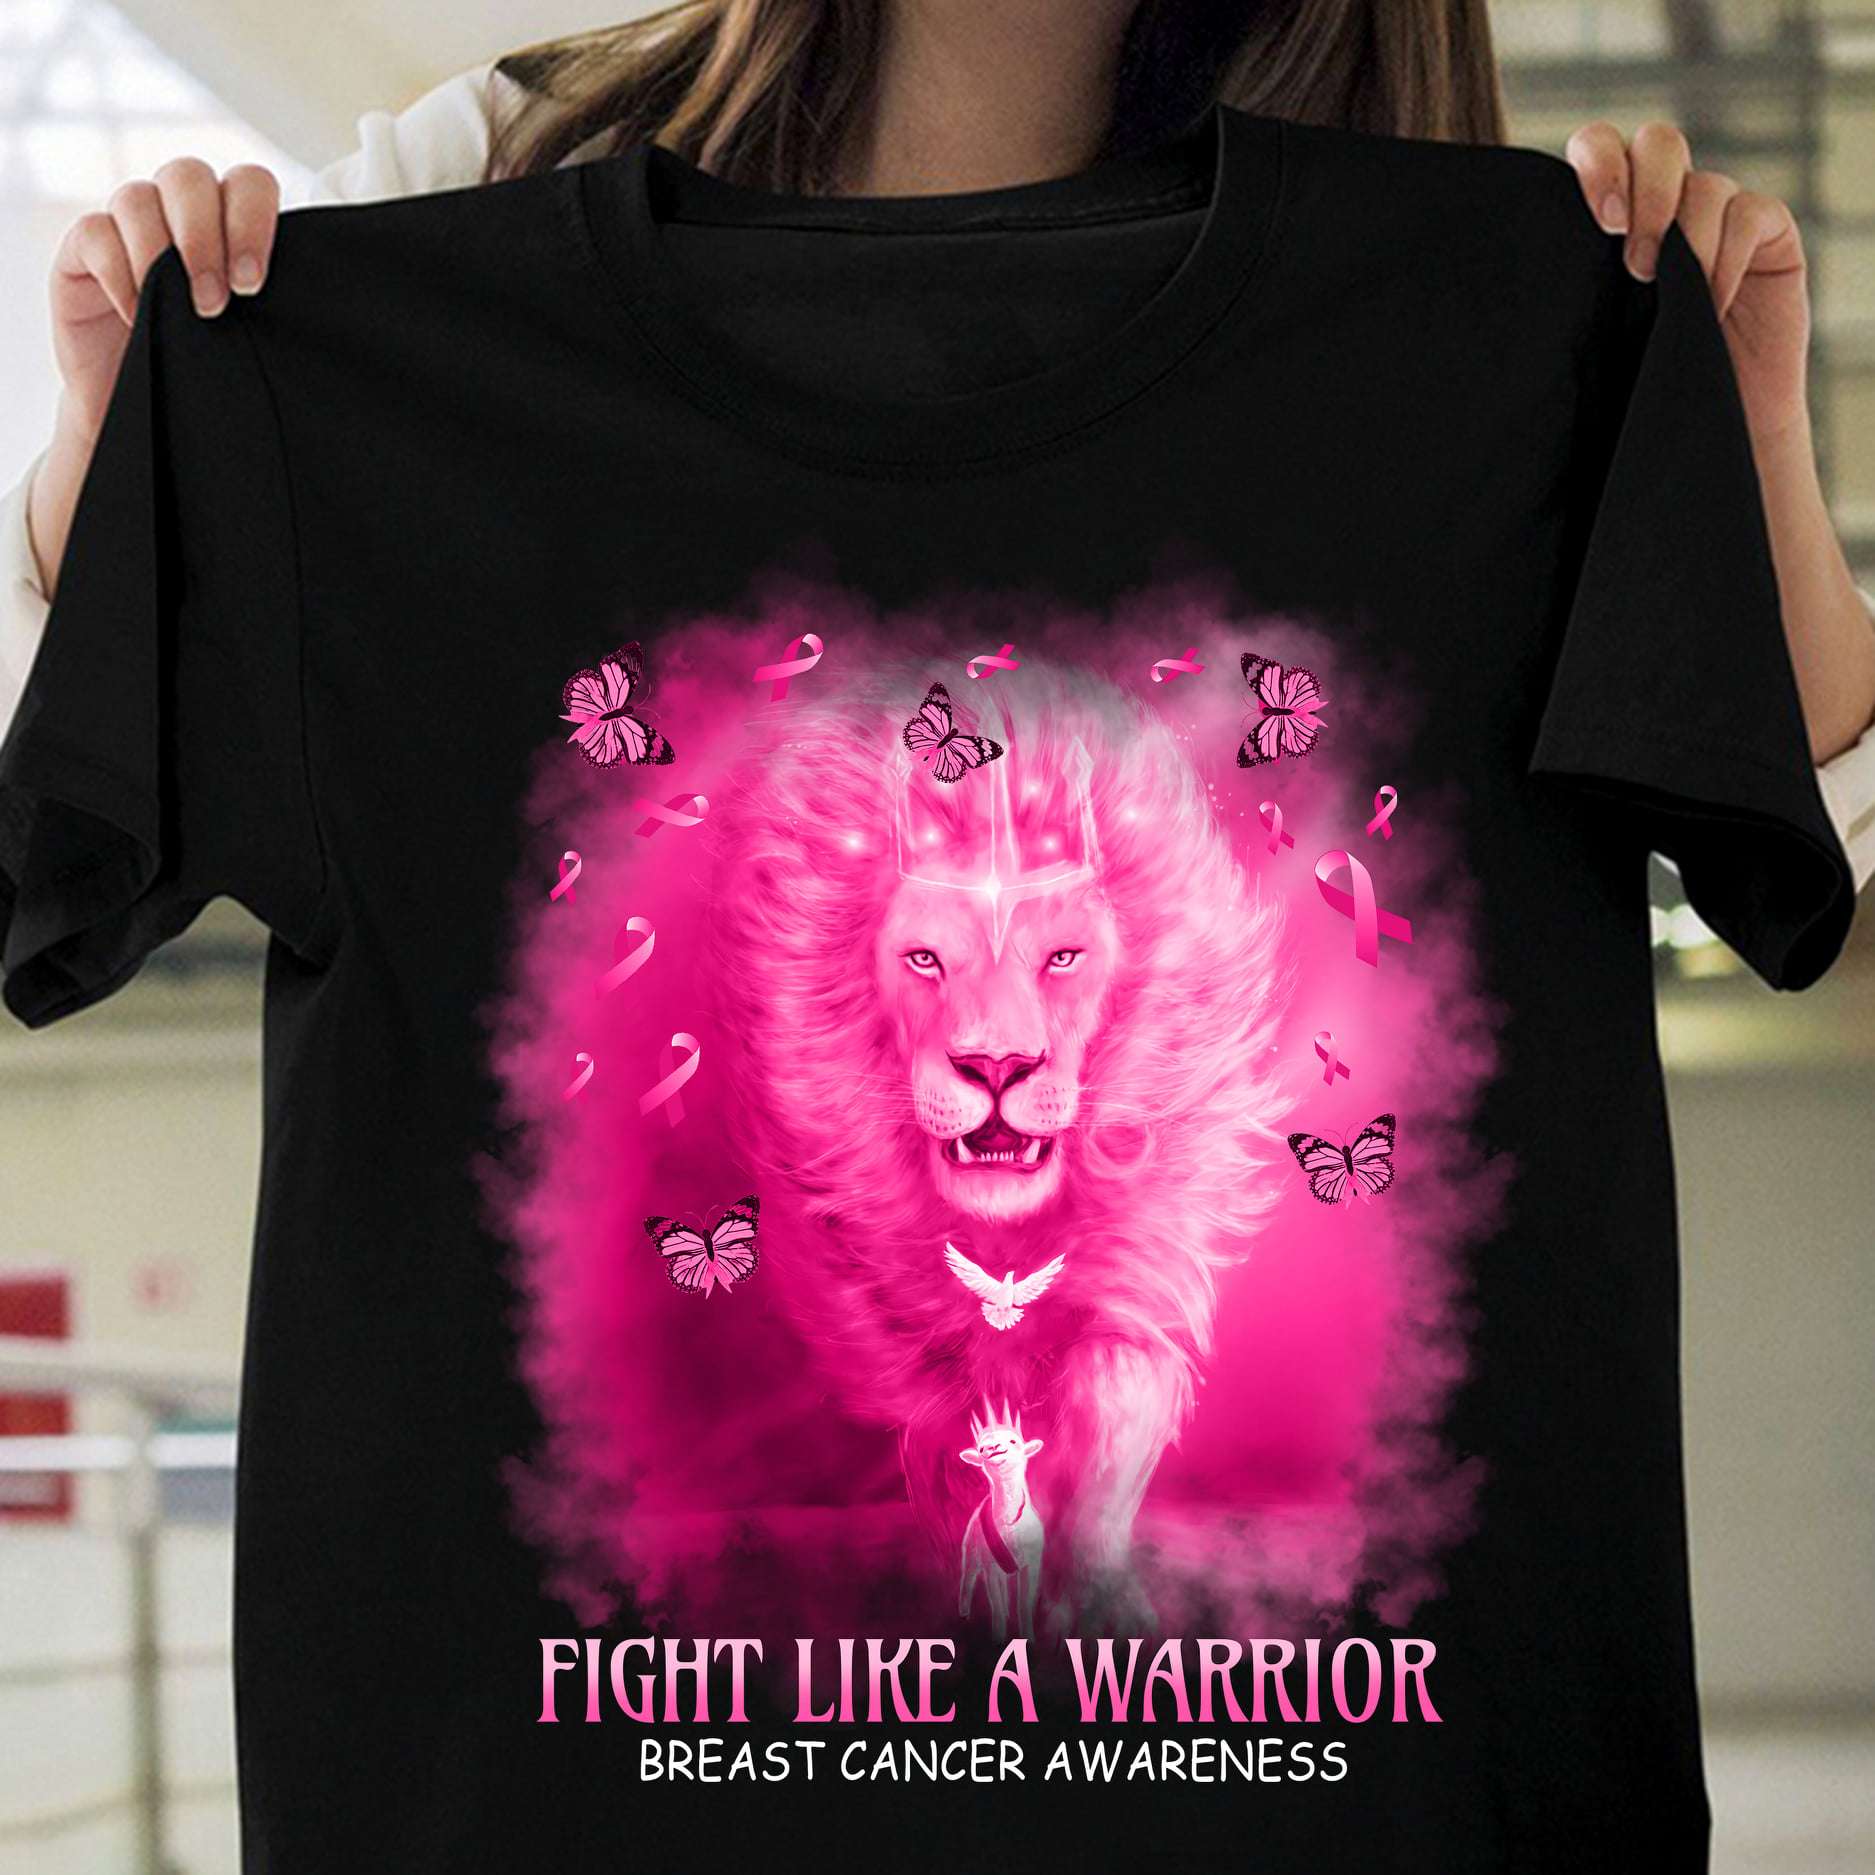 Fight like a warrior - Breast cancer awareness, pink lion king